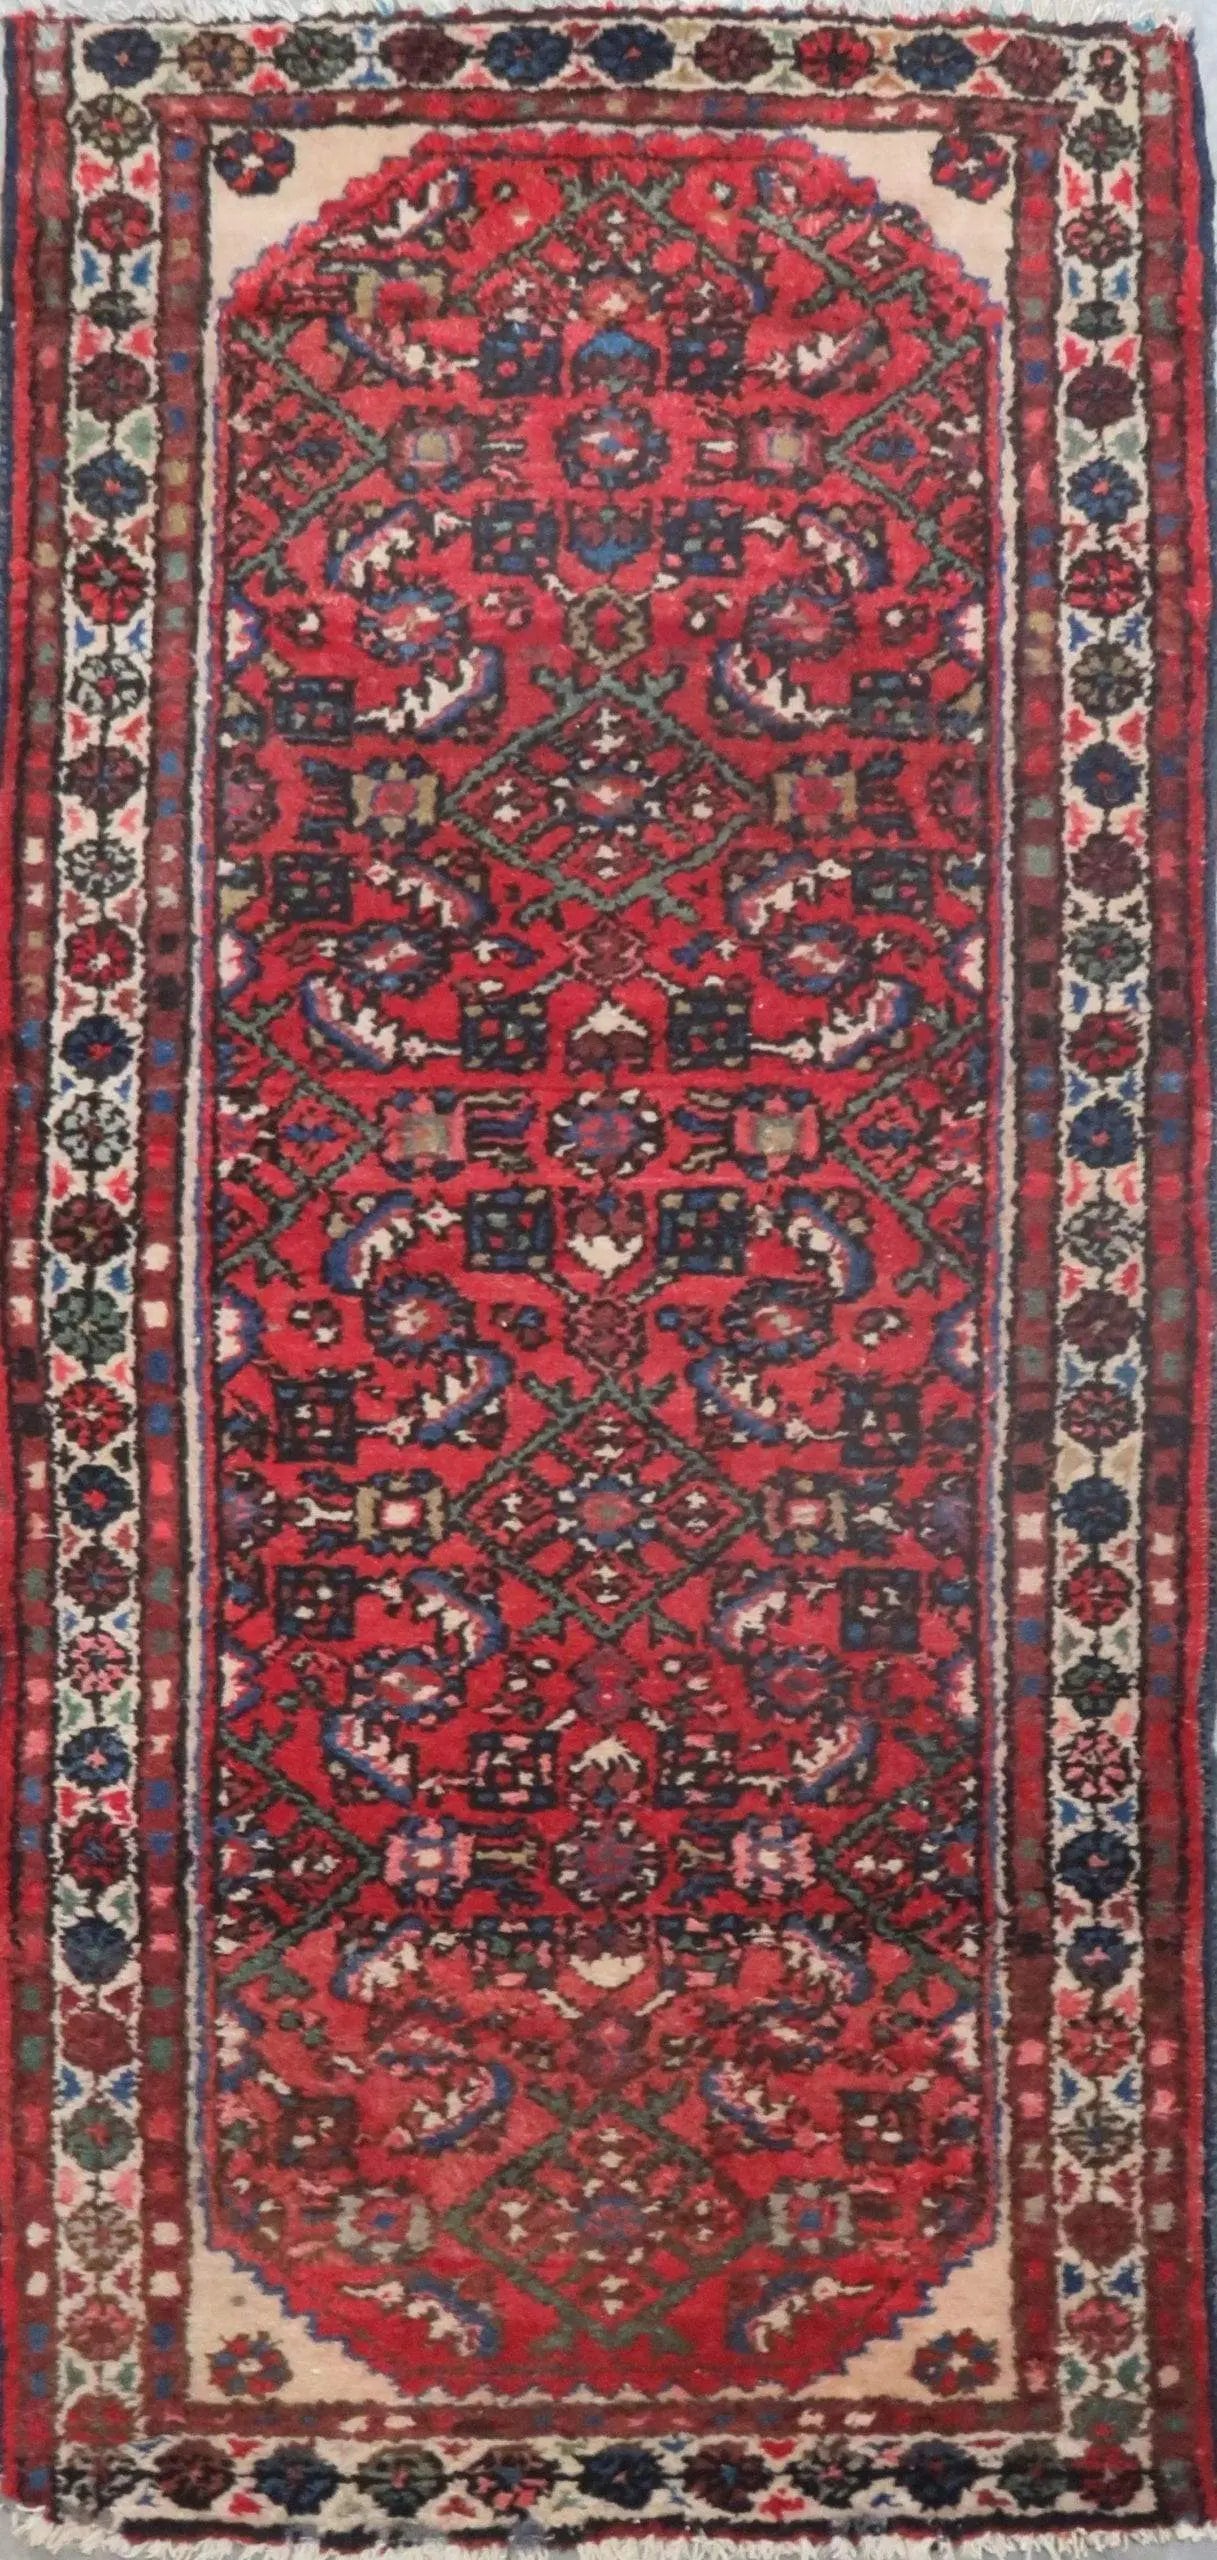 Hand-Knotted Persian Wool Rug _ Luxurious Vintage Design, 5'5" x 2'6", Artisan Crafted